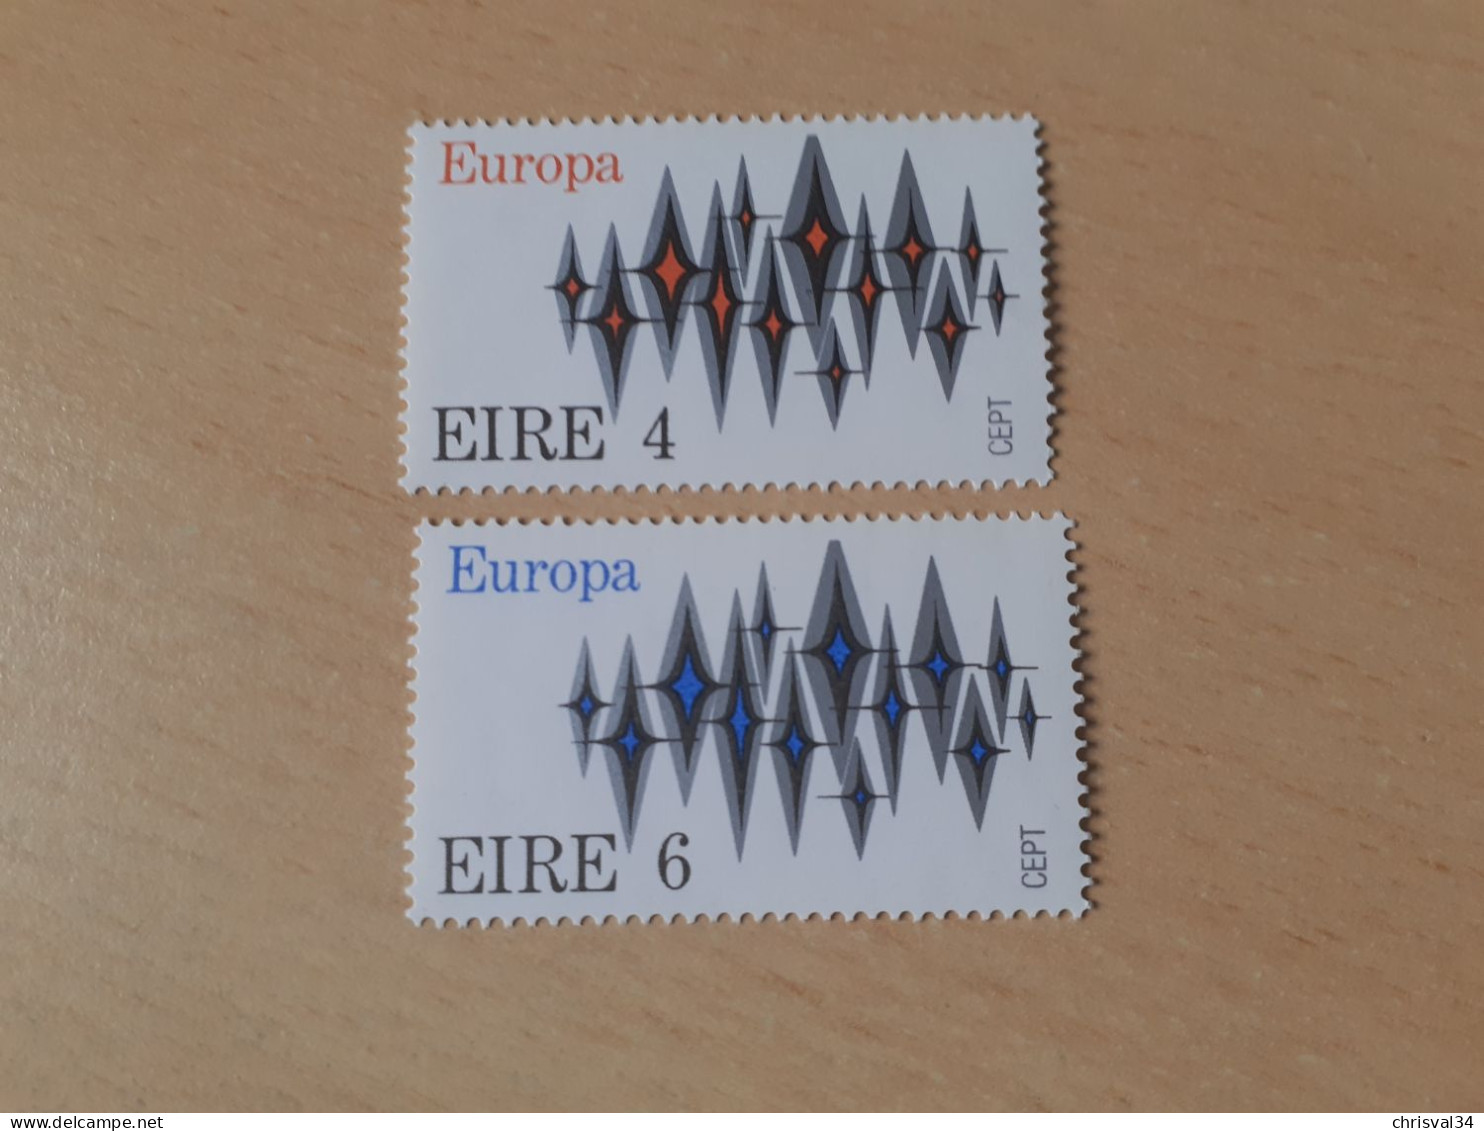 TIMBRES   IRLANDE   ANNEE   1972   N  278  /  279   COTE  20,00  EUROS   NEUFS  LUXE** - Nuovi